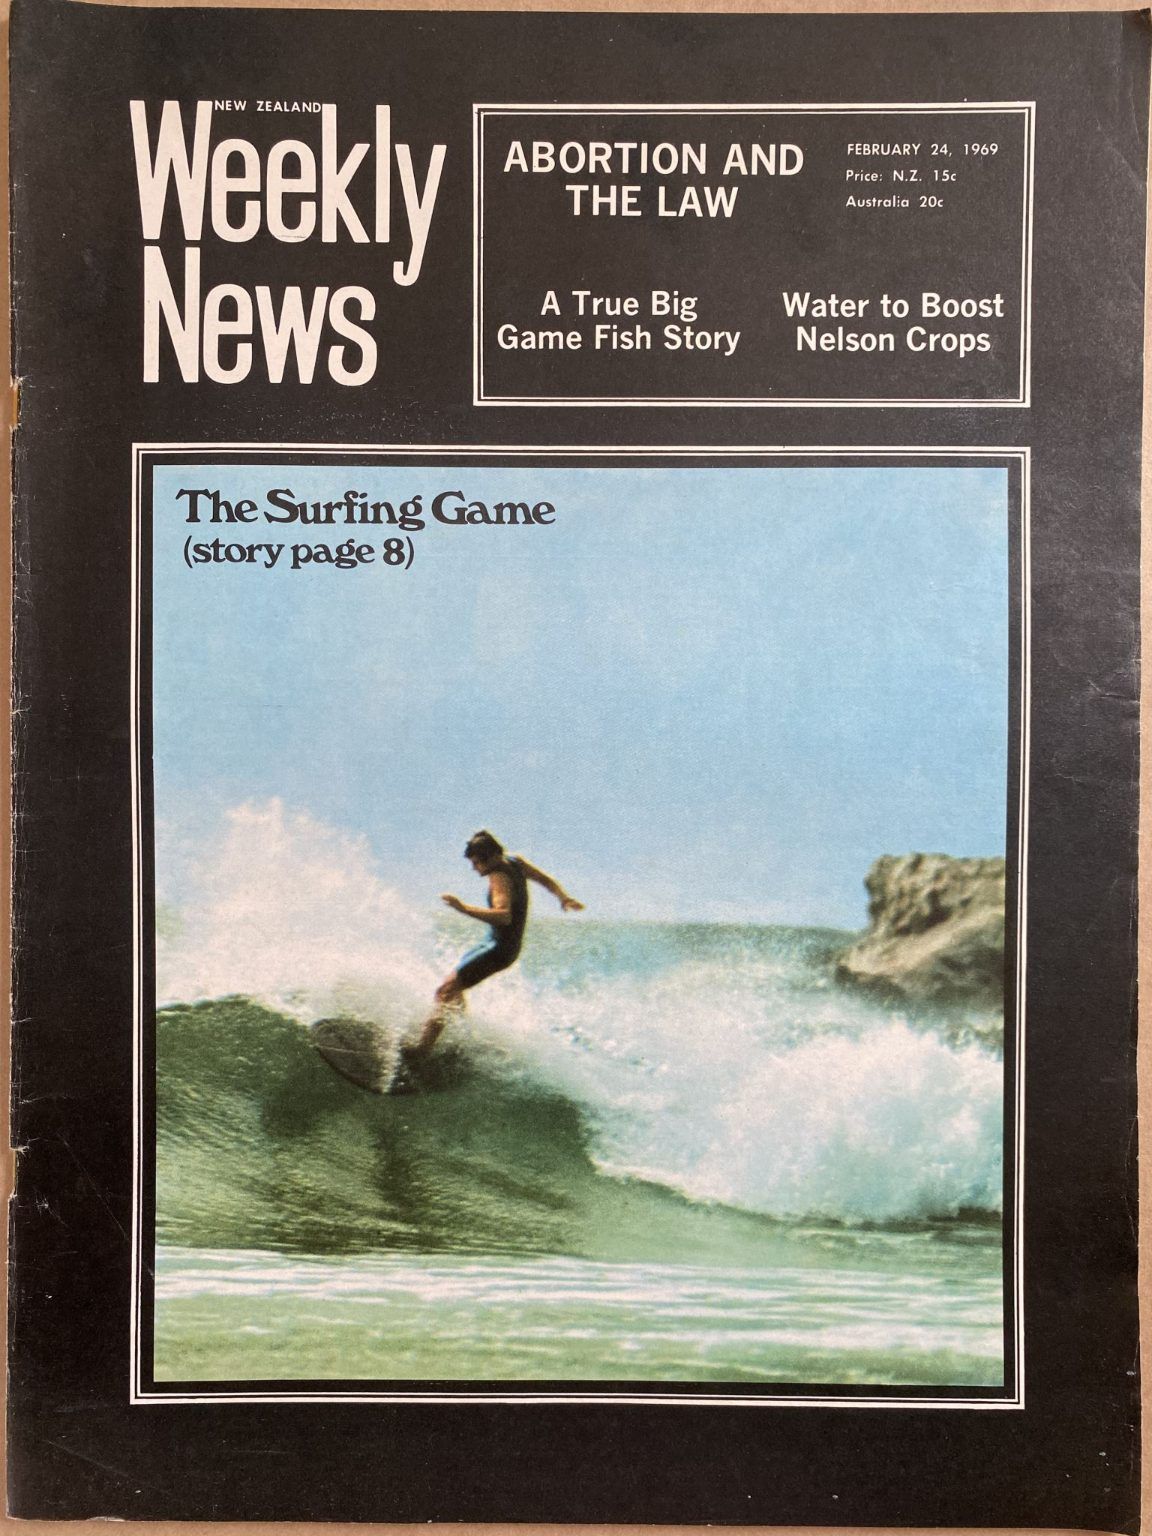 OLD NEWSPAPER: New Zealand Weekly News, No. 5491, 24 February 1969